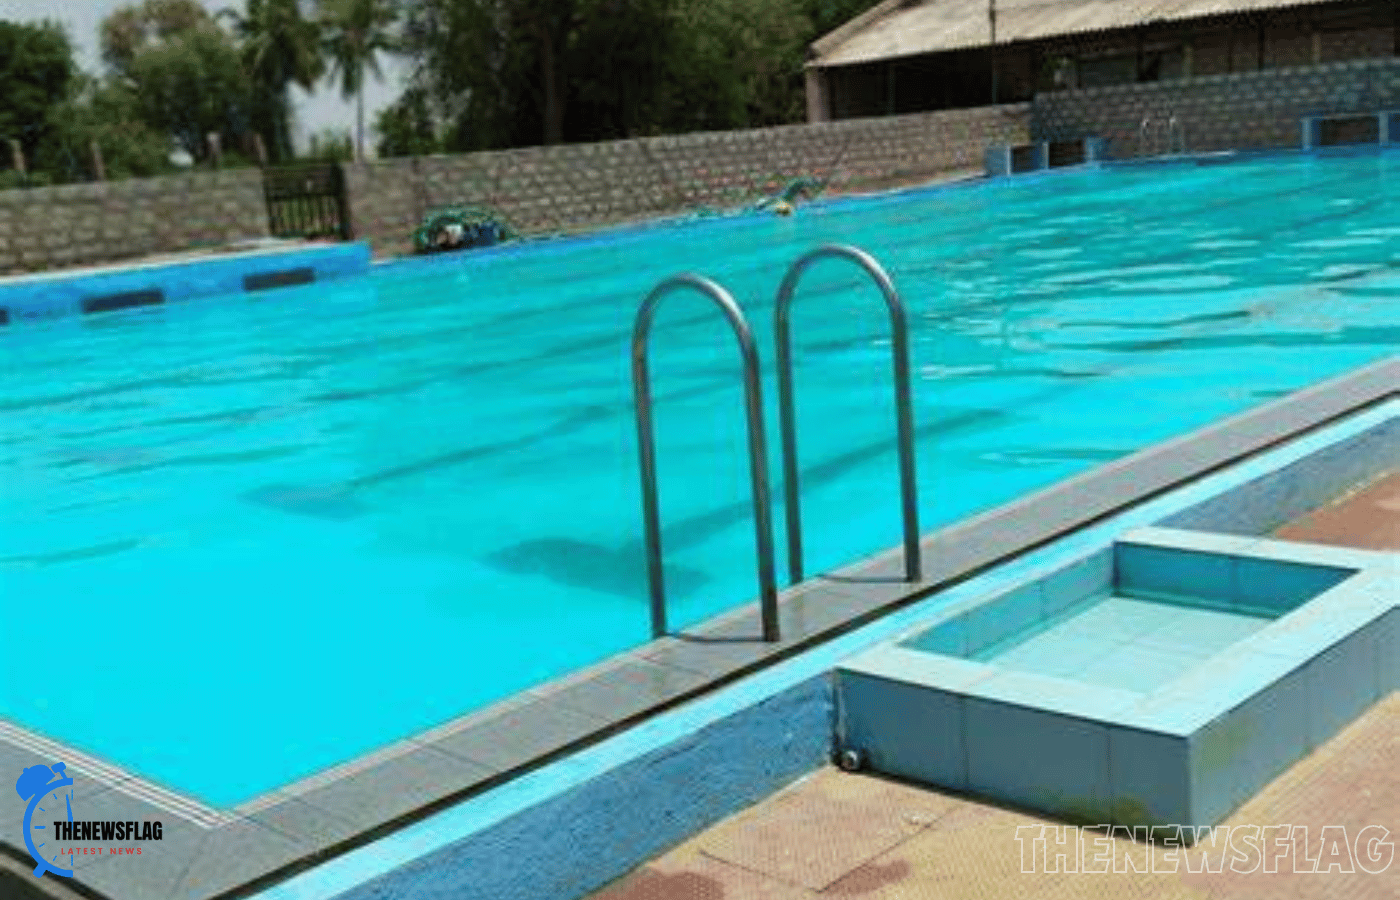 Bengaluru: During a crisis, drinking water use in swimming pools is prohibited, and violators face a Rs 5,000 fine.